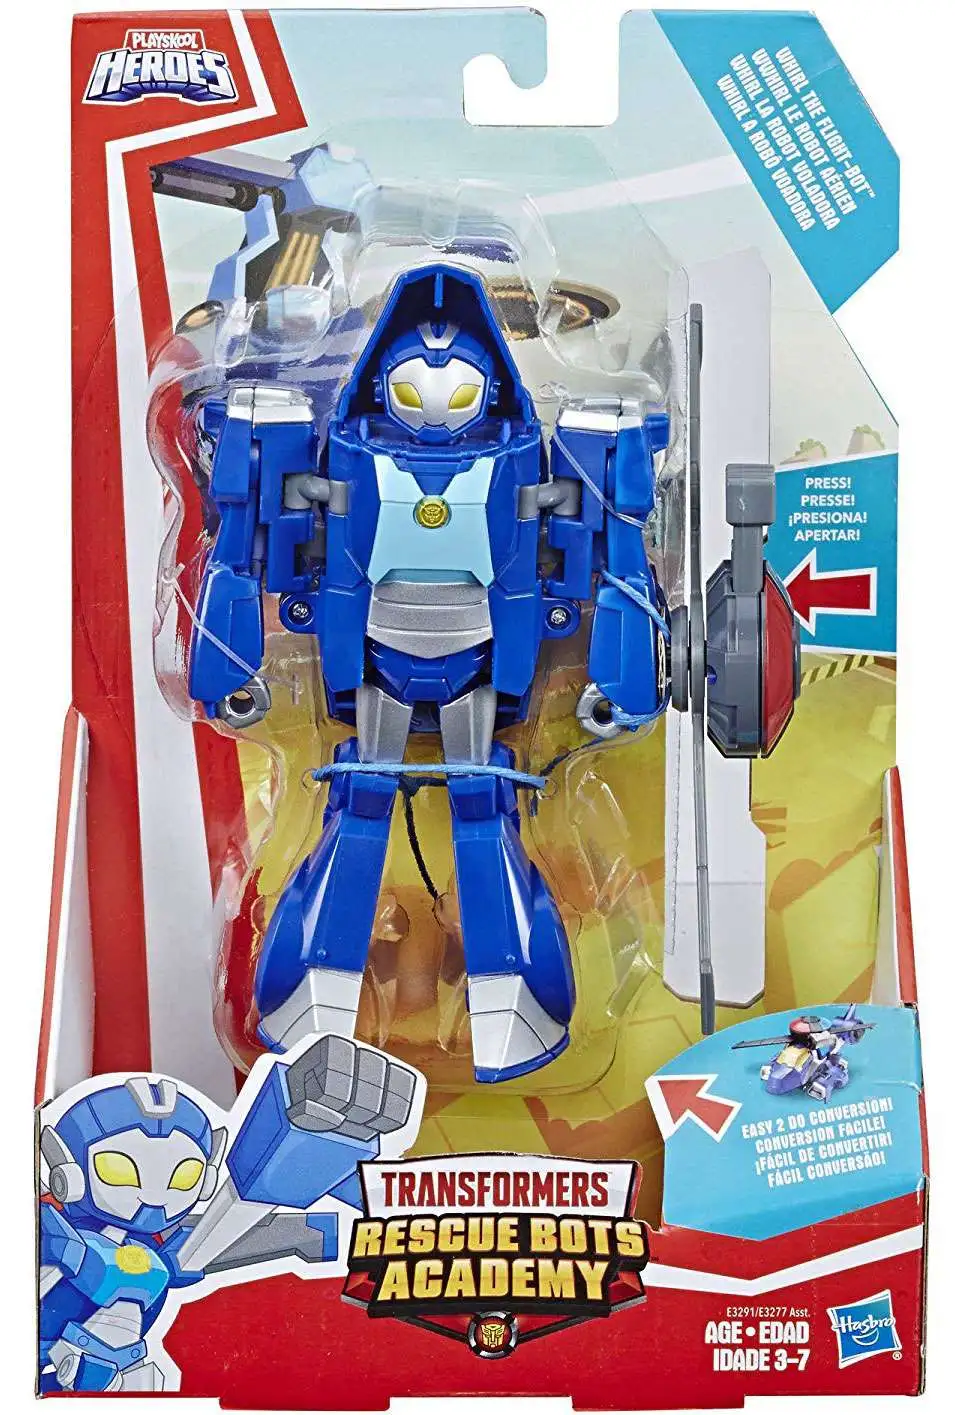 Playskool Heroes Rescue Bots Academy 18 cm WHIRL with rotating mechanism blades 